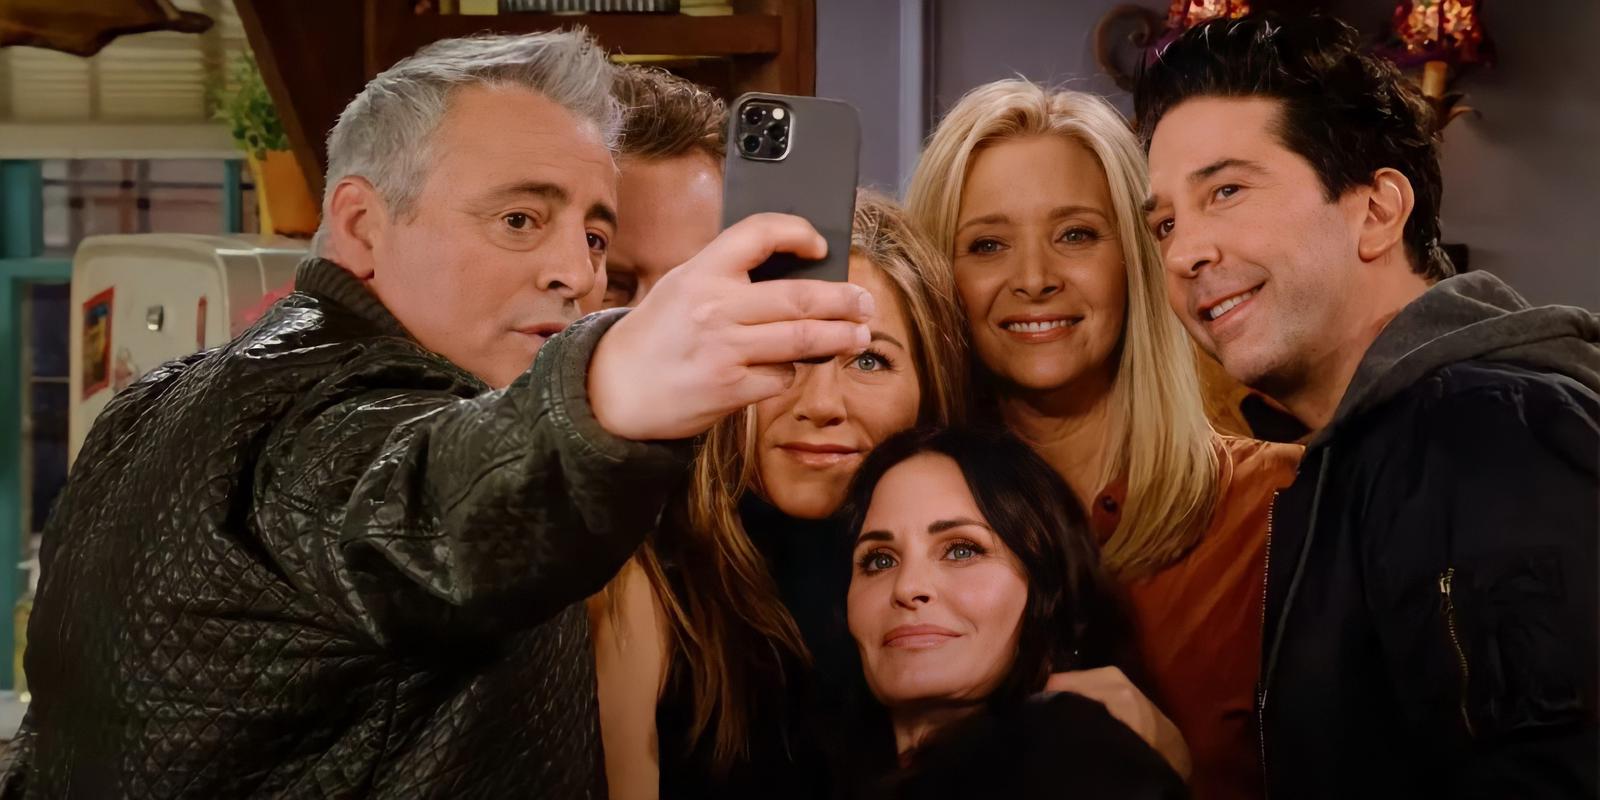 Watch ‘Friends’ cast struggle to keep it together in new reunion trailer